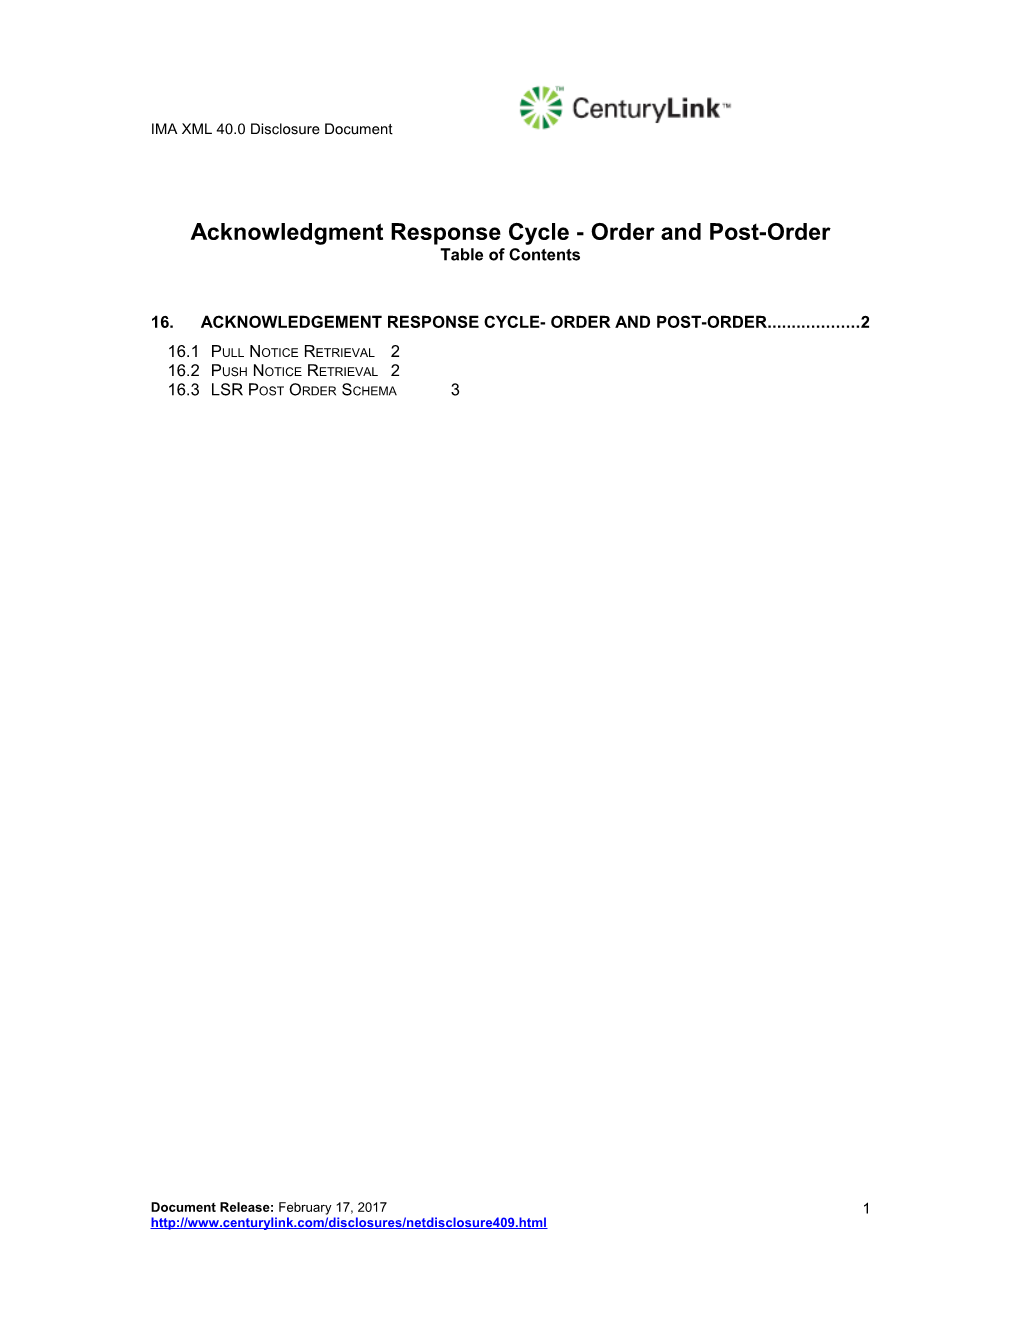 Functional Acknowledgment Response Transaction Cycle